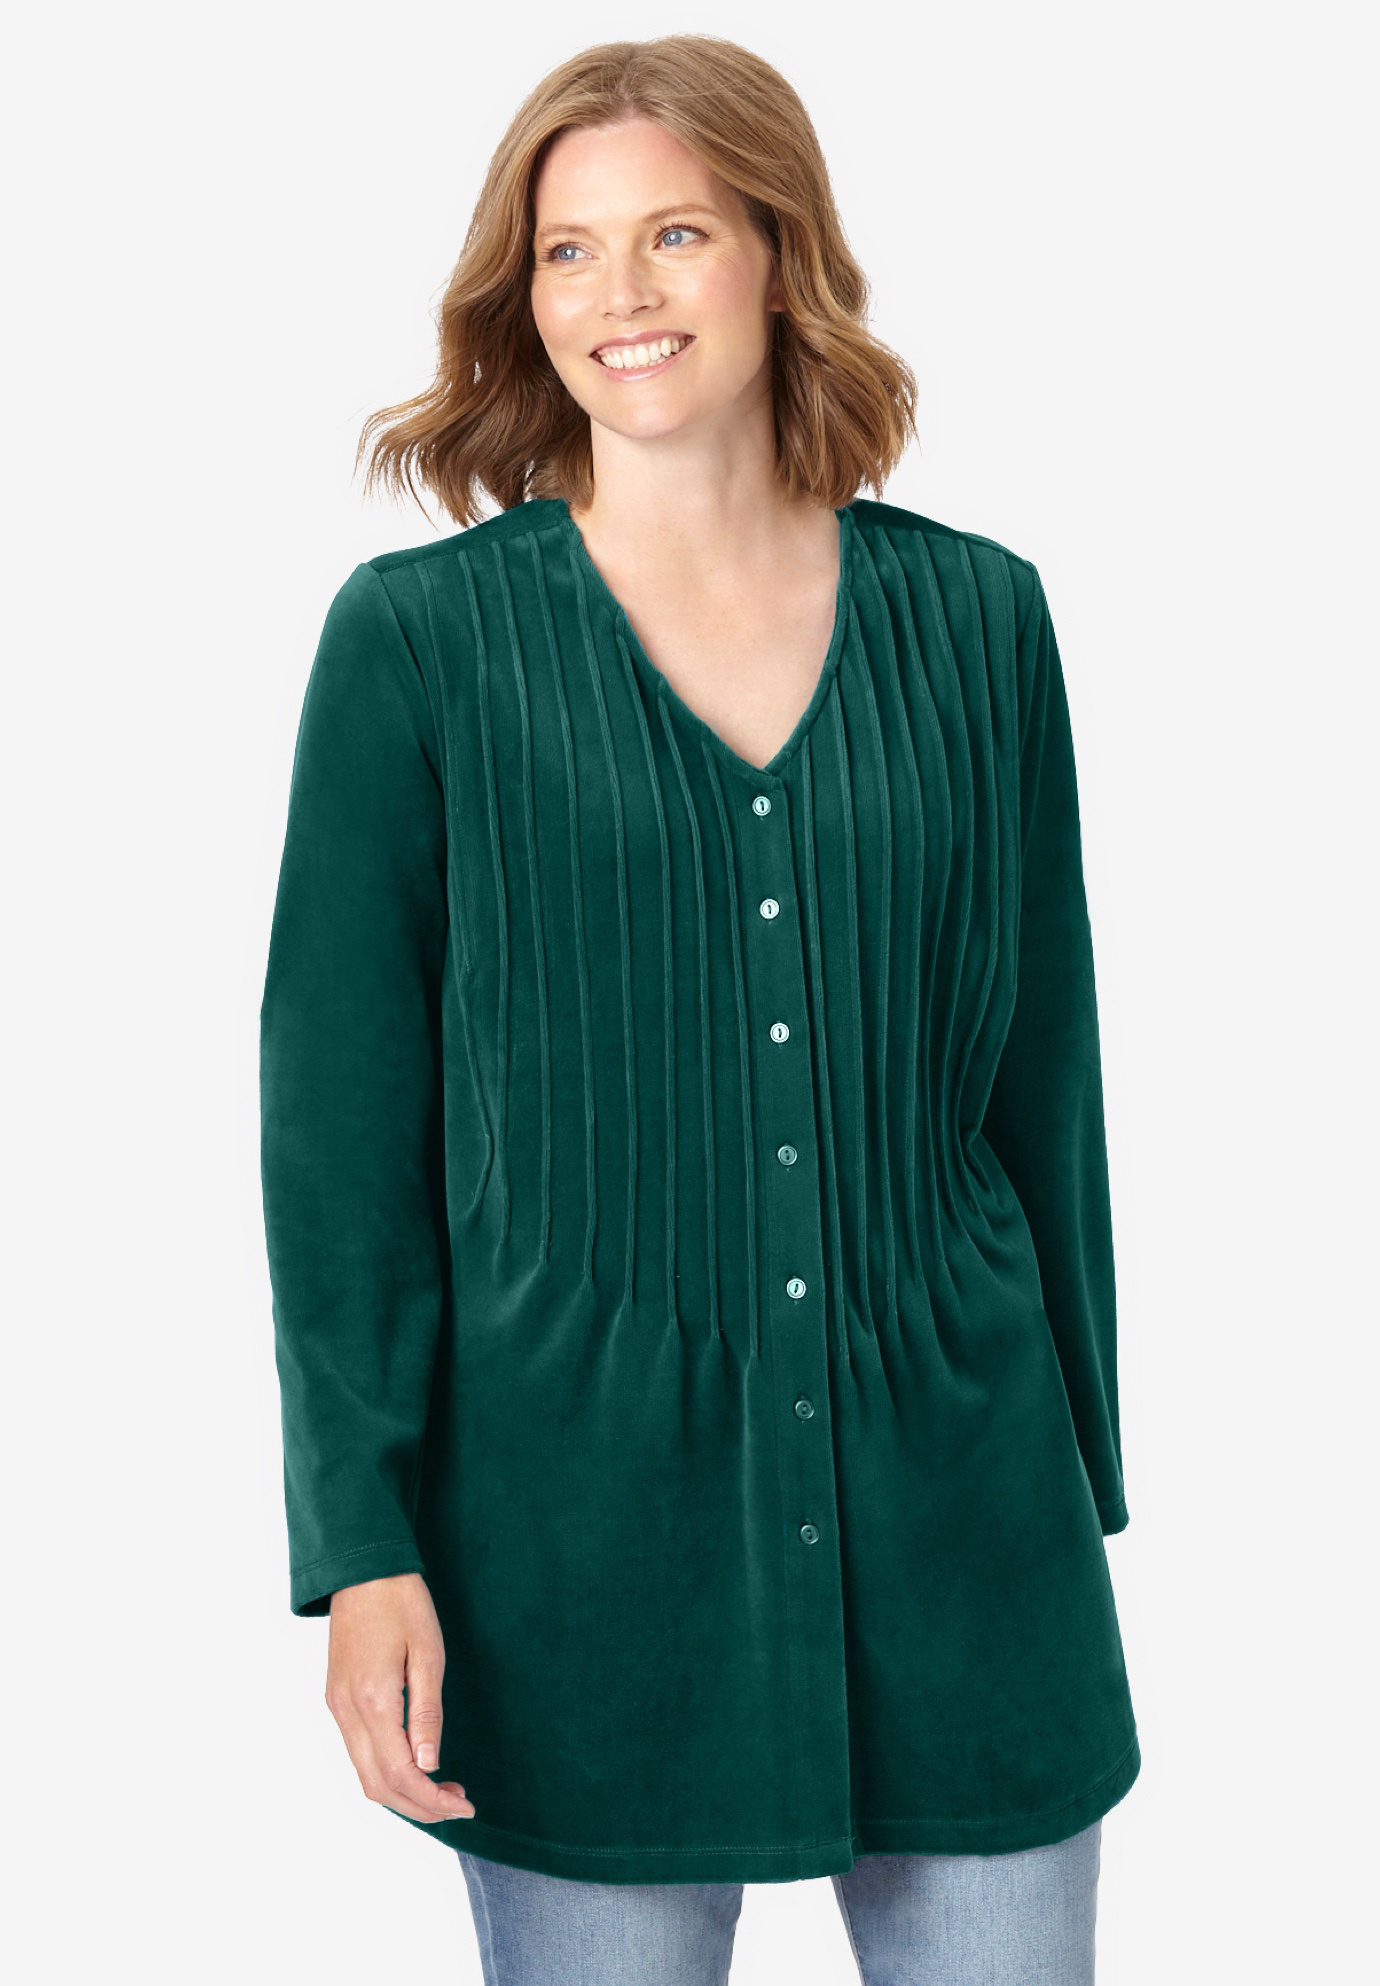 Knit velour tunic shirt in a comfortable A-line with pintucks, 